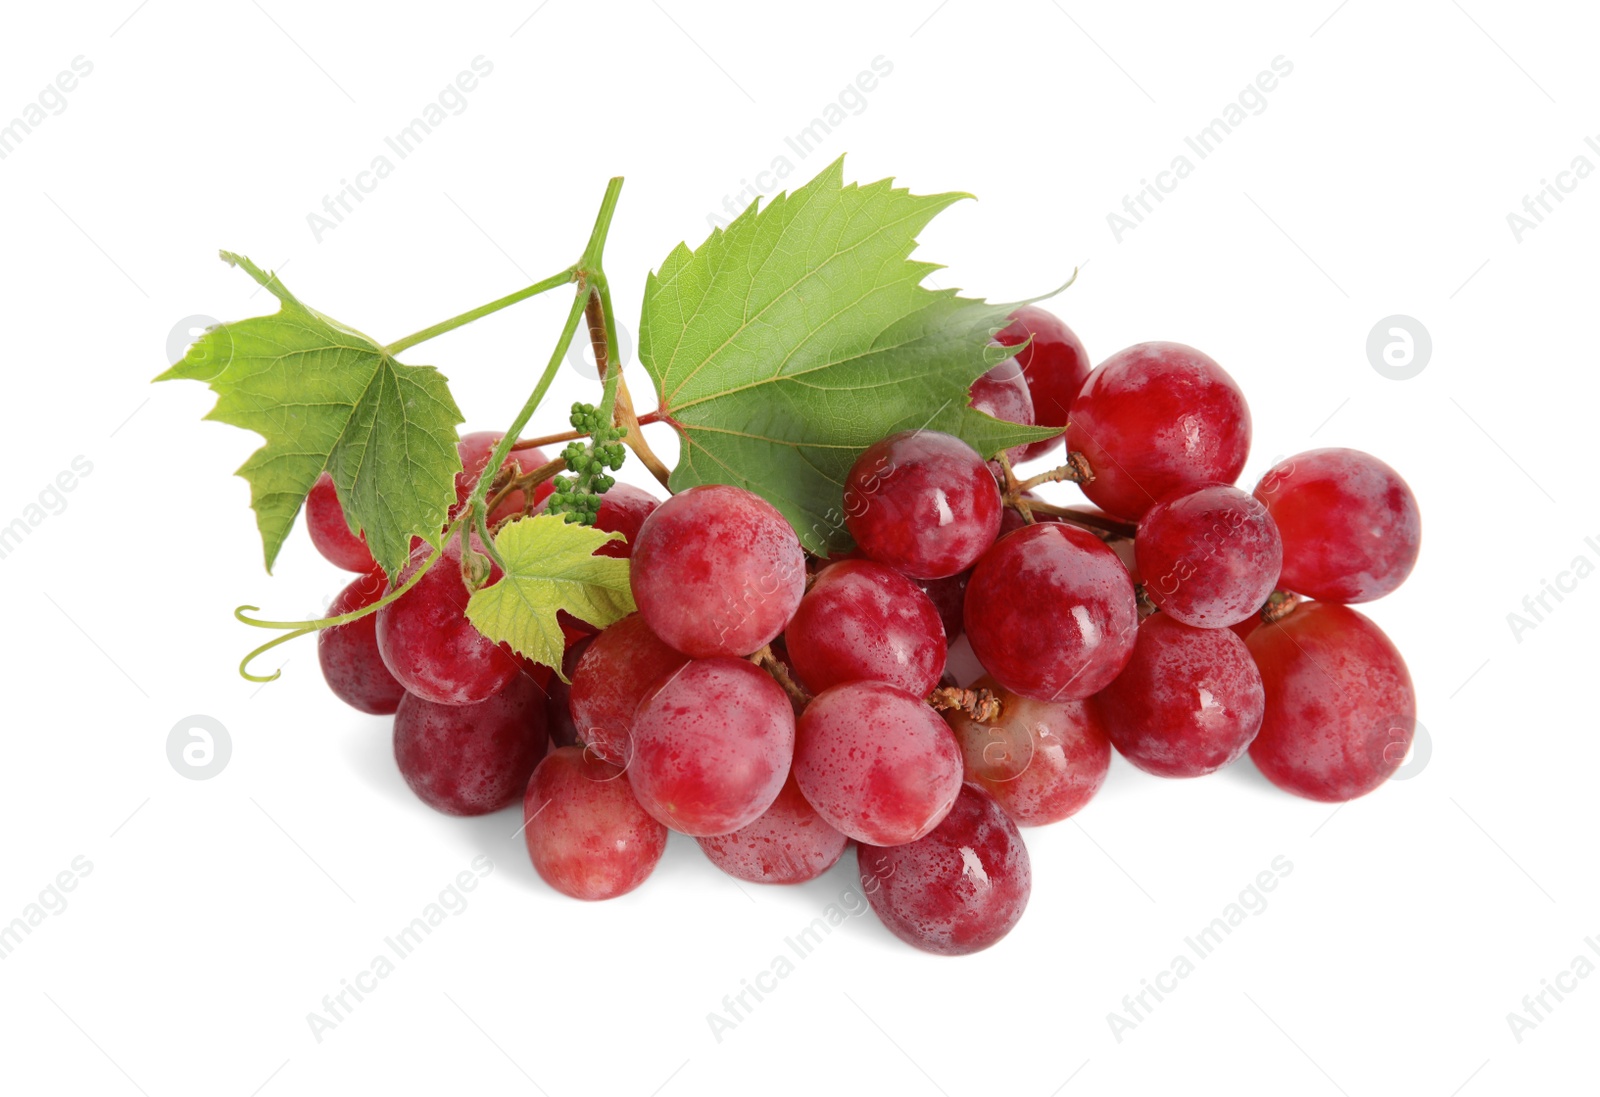 Photo of Cluster of ripe red grapes with green leaves on white background